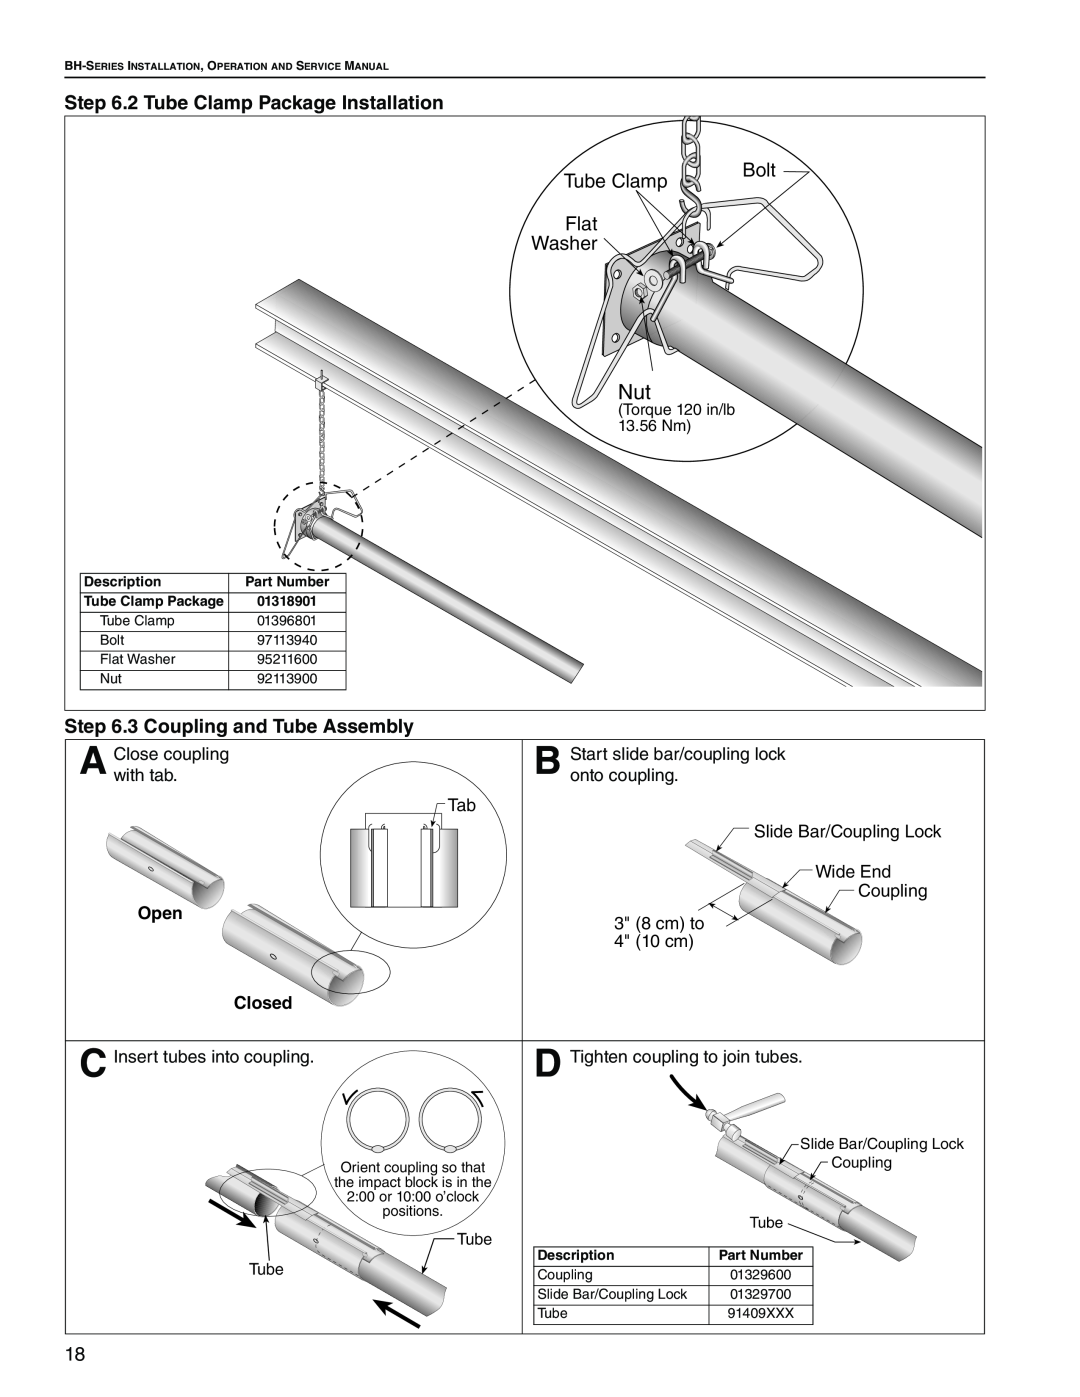 Roberts Gorden Linear Heater manual 2 Tube Clamp Package Installation, 3 Coupling and Tube Assembly 